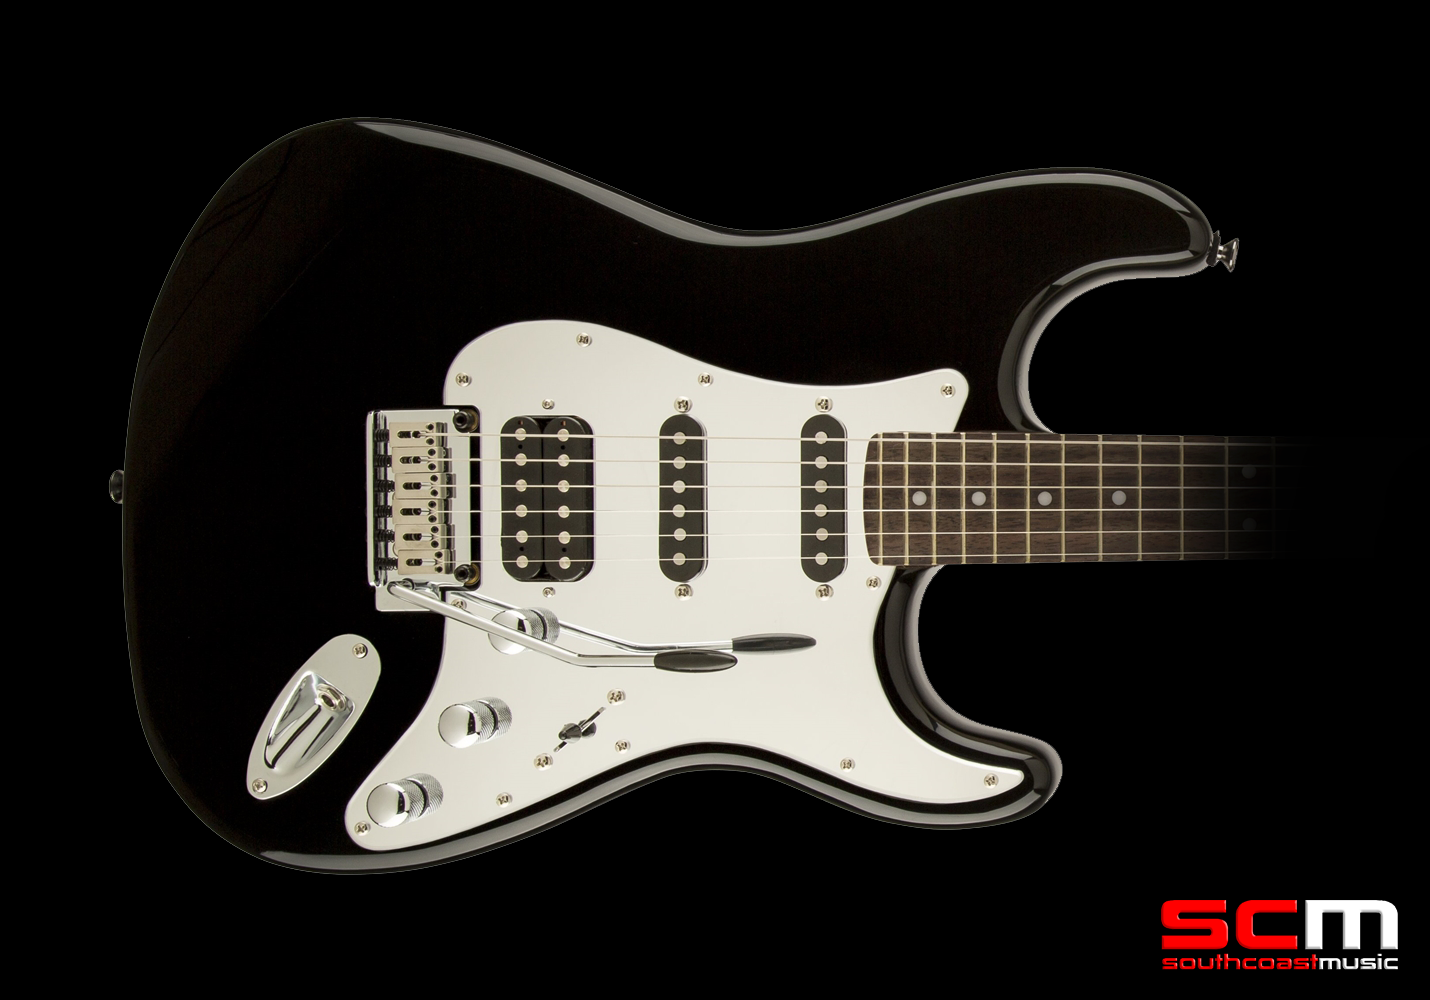 Squier Standard Stratocaster Black and Chrome